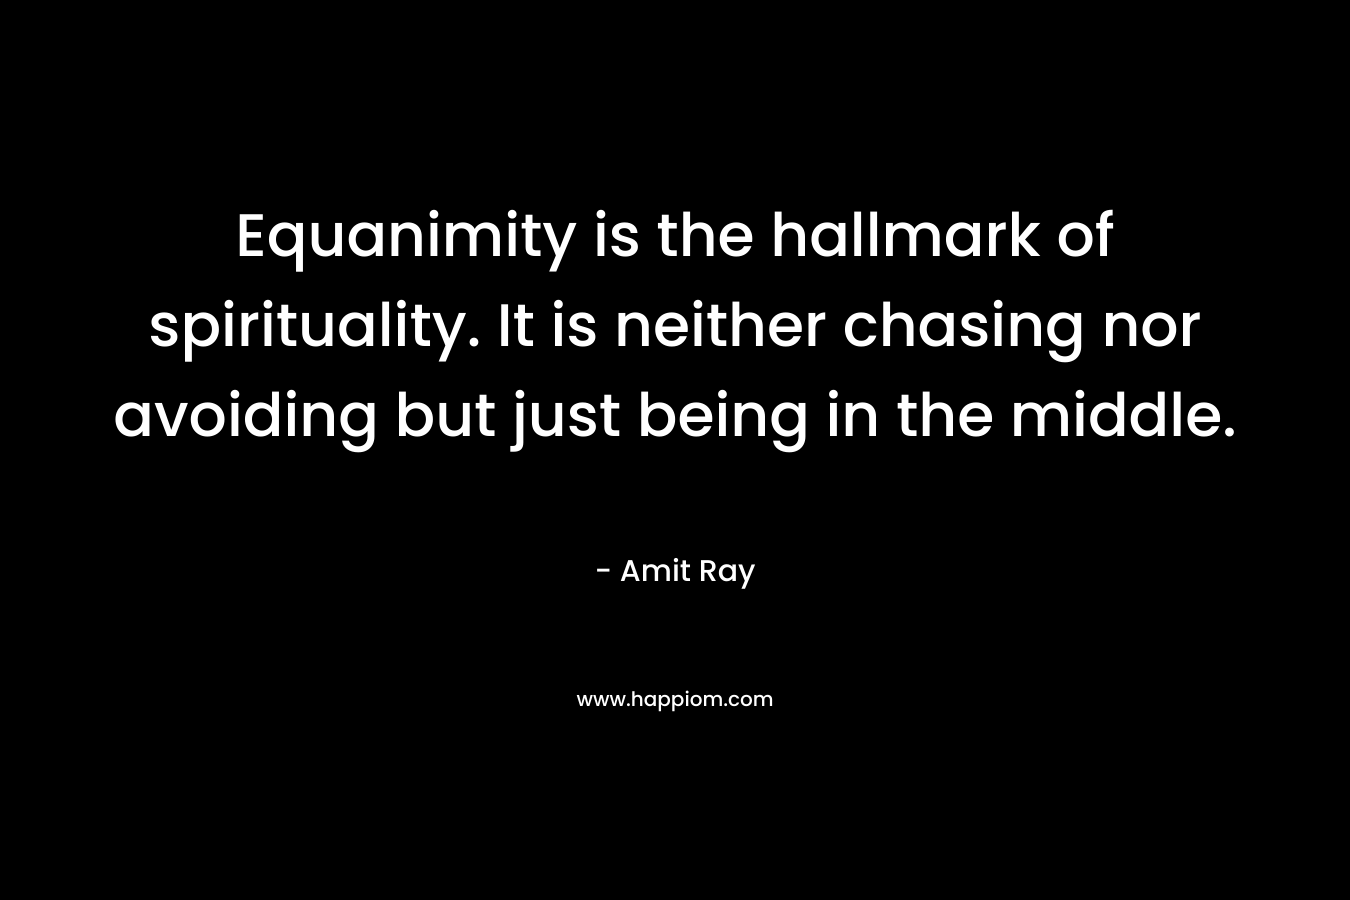 Equanimity is the hallmark of spirituality. It is neither chasing nor avoiding but just being in the middle. – Amit Ray